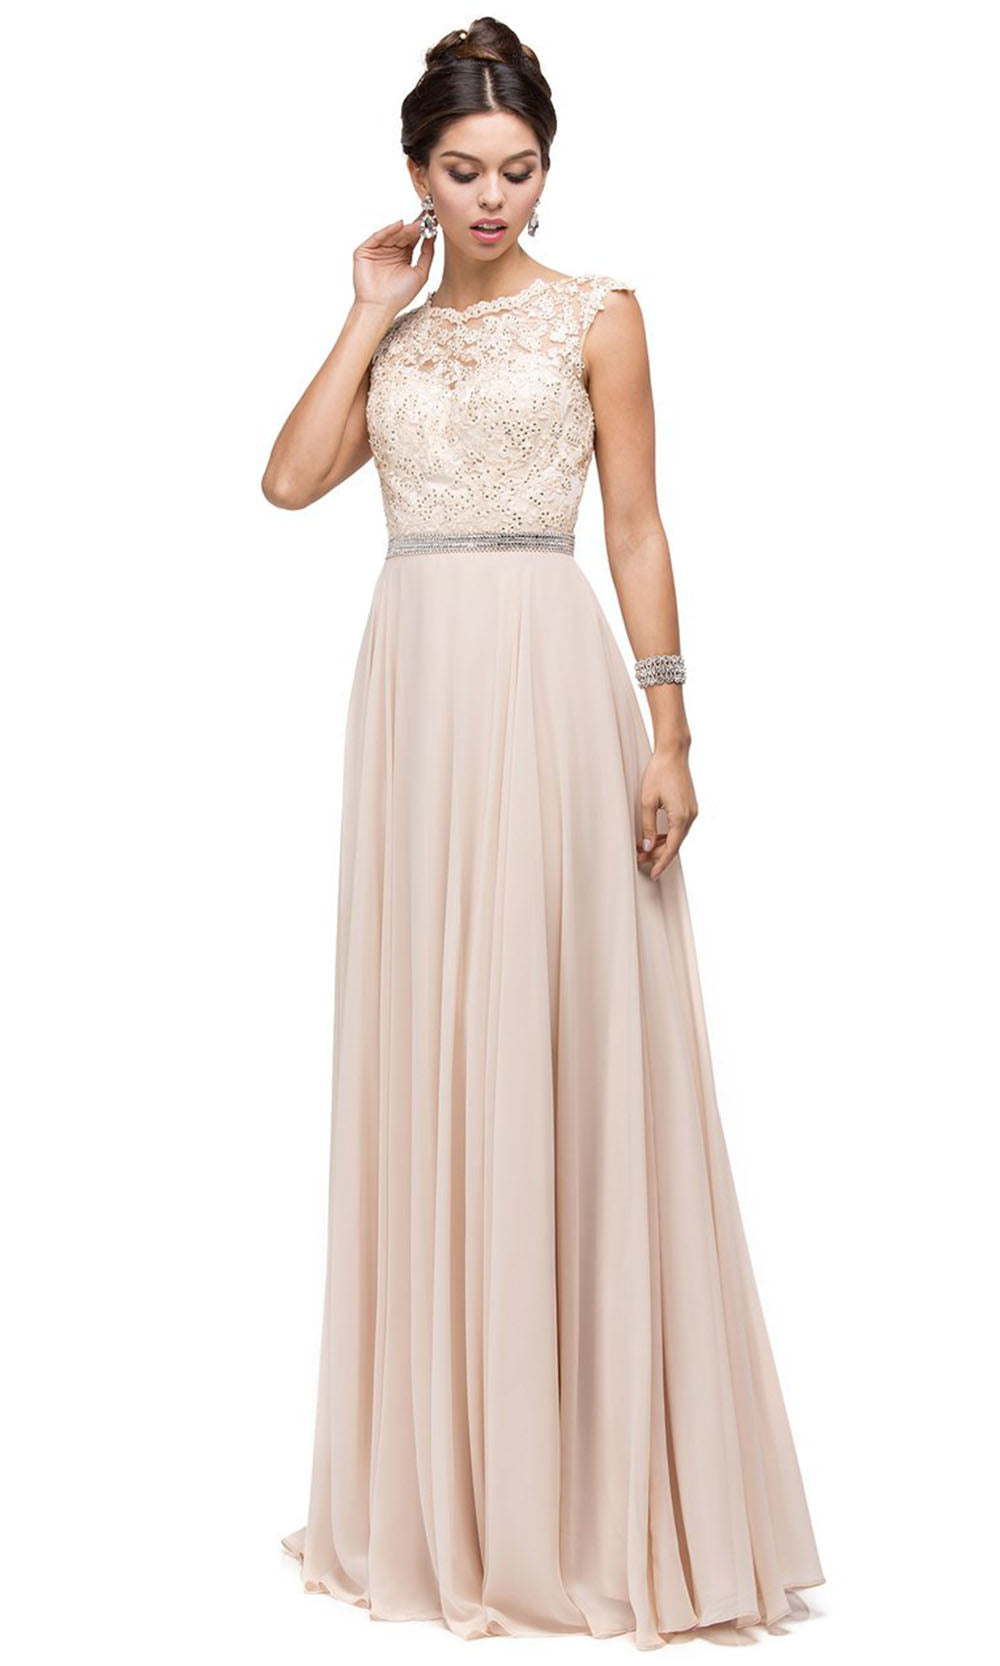 Dancing Queen - 9675 Embroidered Bateau Neck A-Line Gown In Neutral